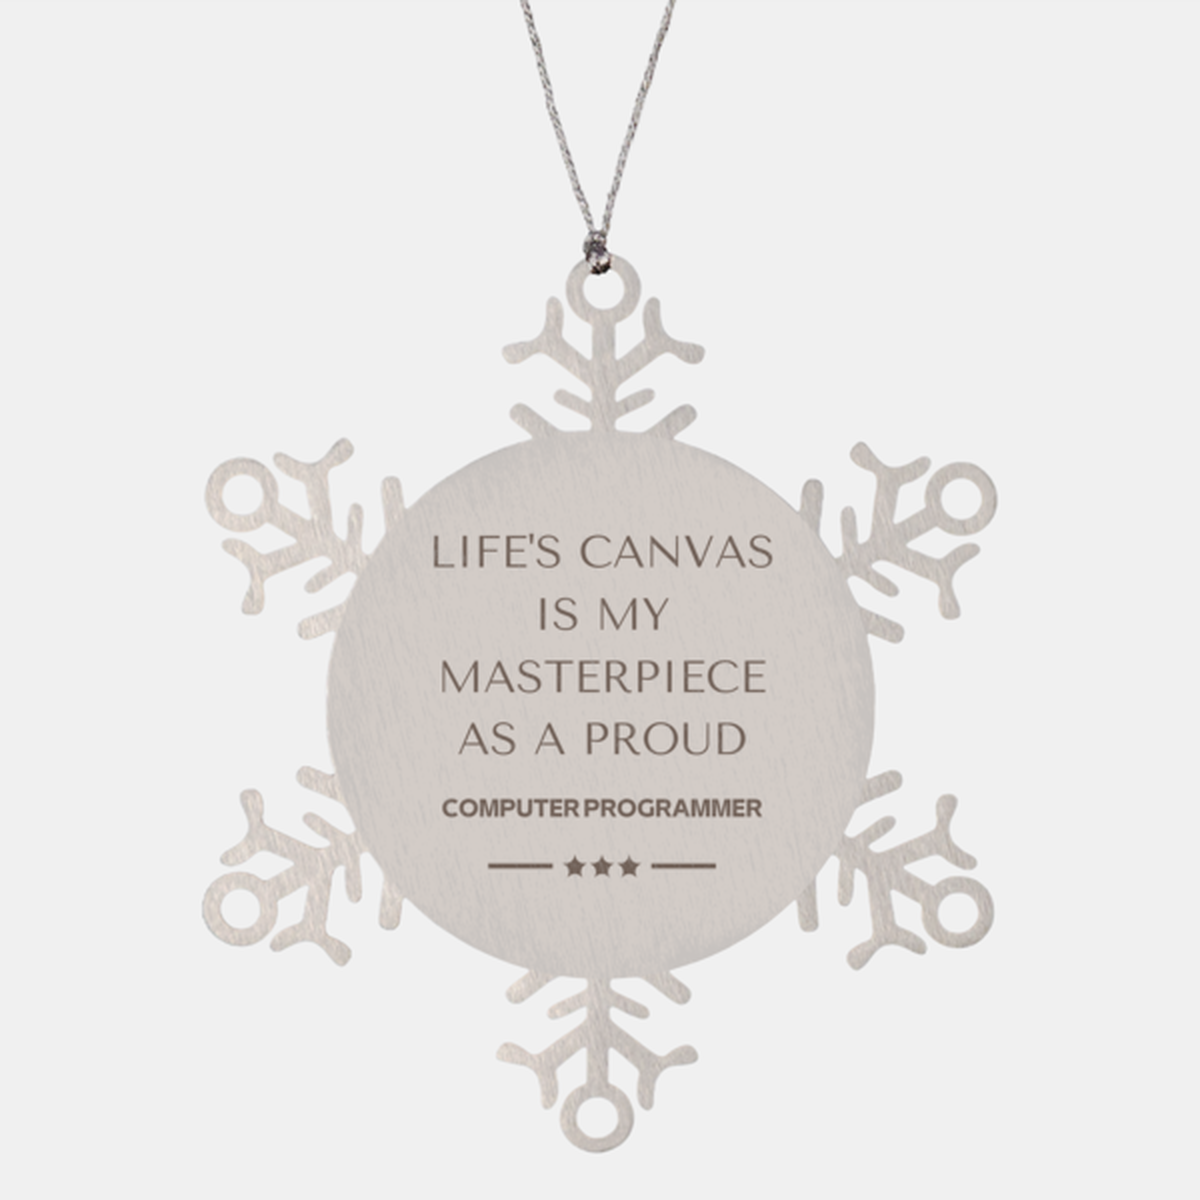 Proud Computer Programmer Gifts, Life's canvas is my masterpiece, Epic Birthday Christmas Unique Snowflake Ornament For Computer Programmer, Coworkers, Men, Women, Friends